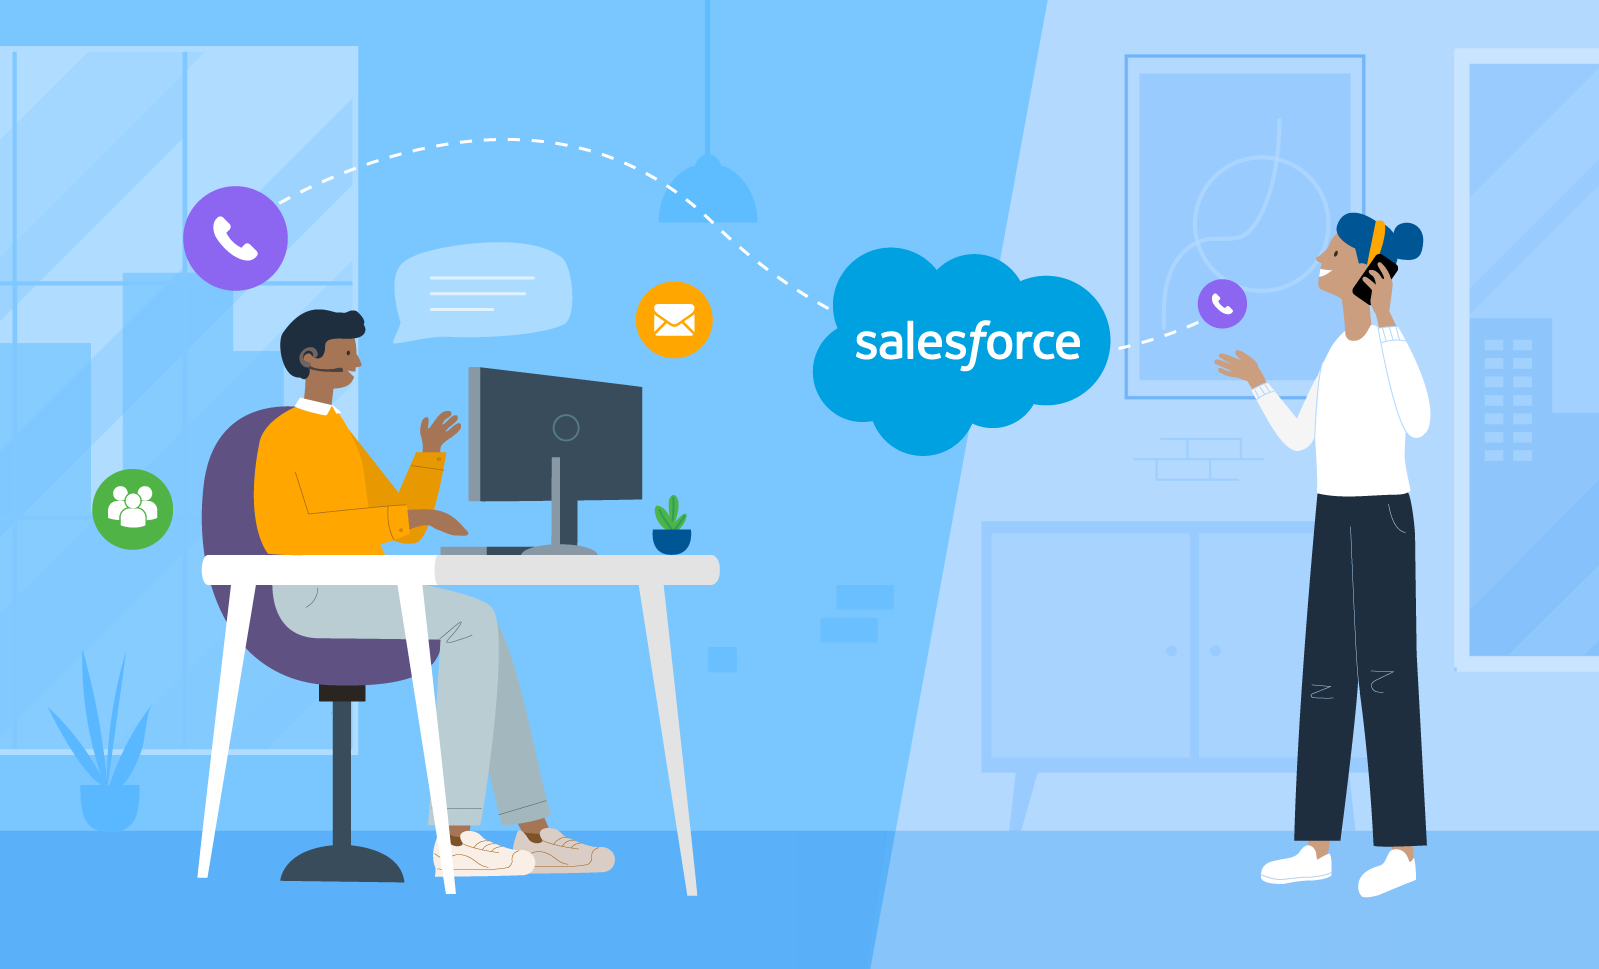 What Is Salesforce?